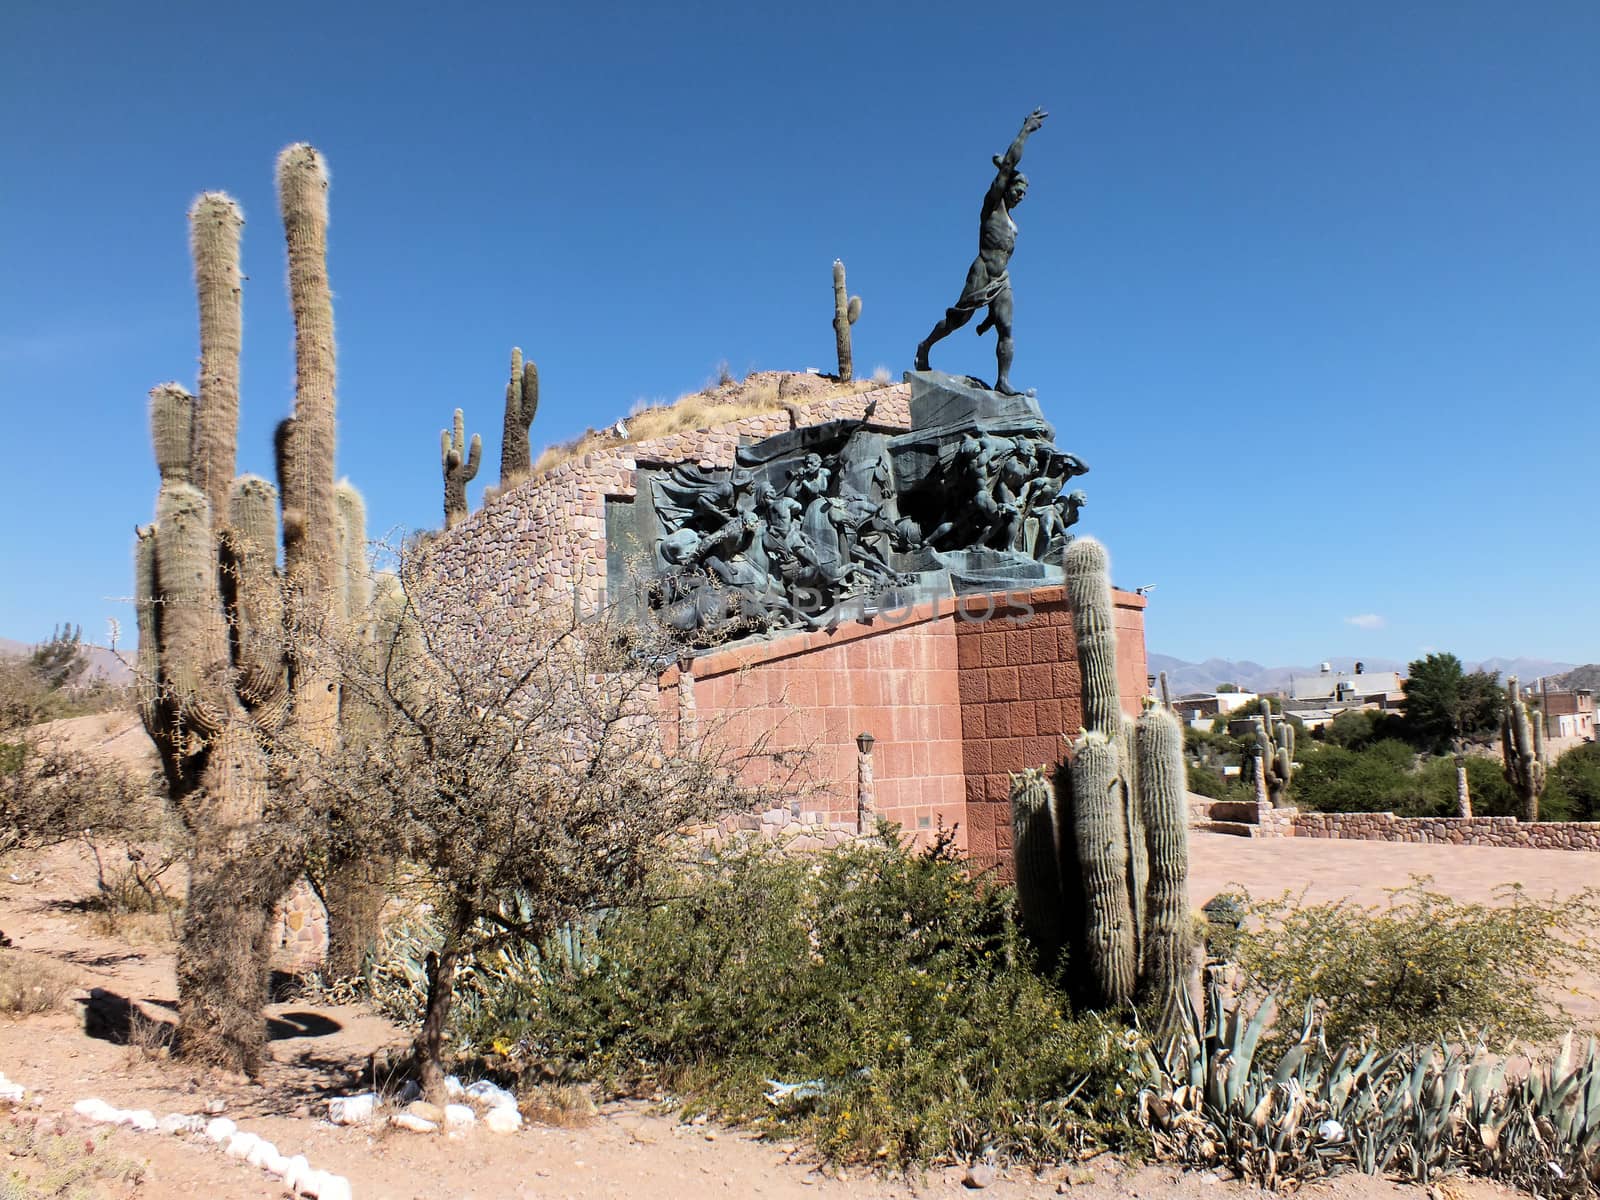 Humahuaca is dominated by the controversial Monumento de la Independencia crowning a small hill just west of the centre and reached by climbing a long flight of steps.